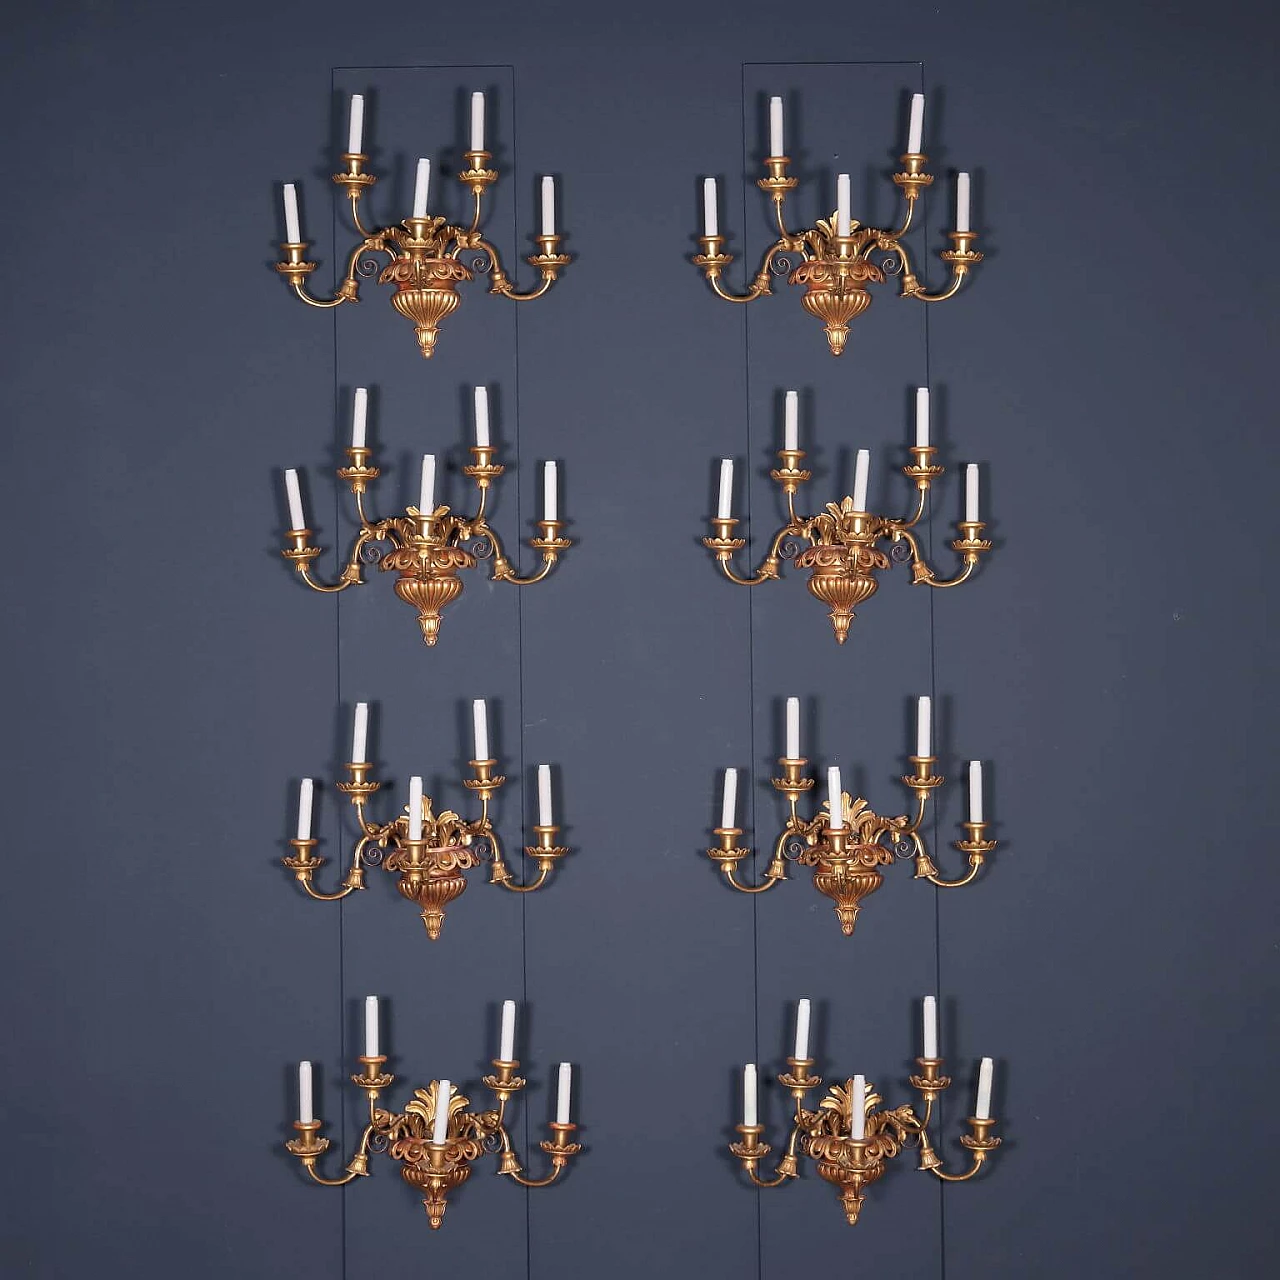 8 Biedermeier style wall sconces in gilded wood and metal, early 19th century 1